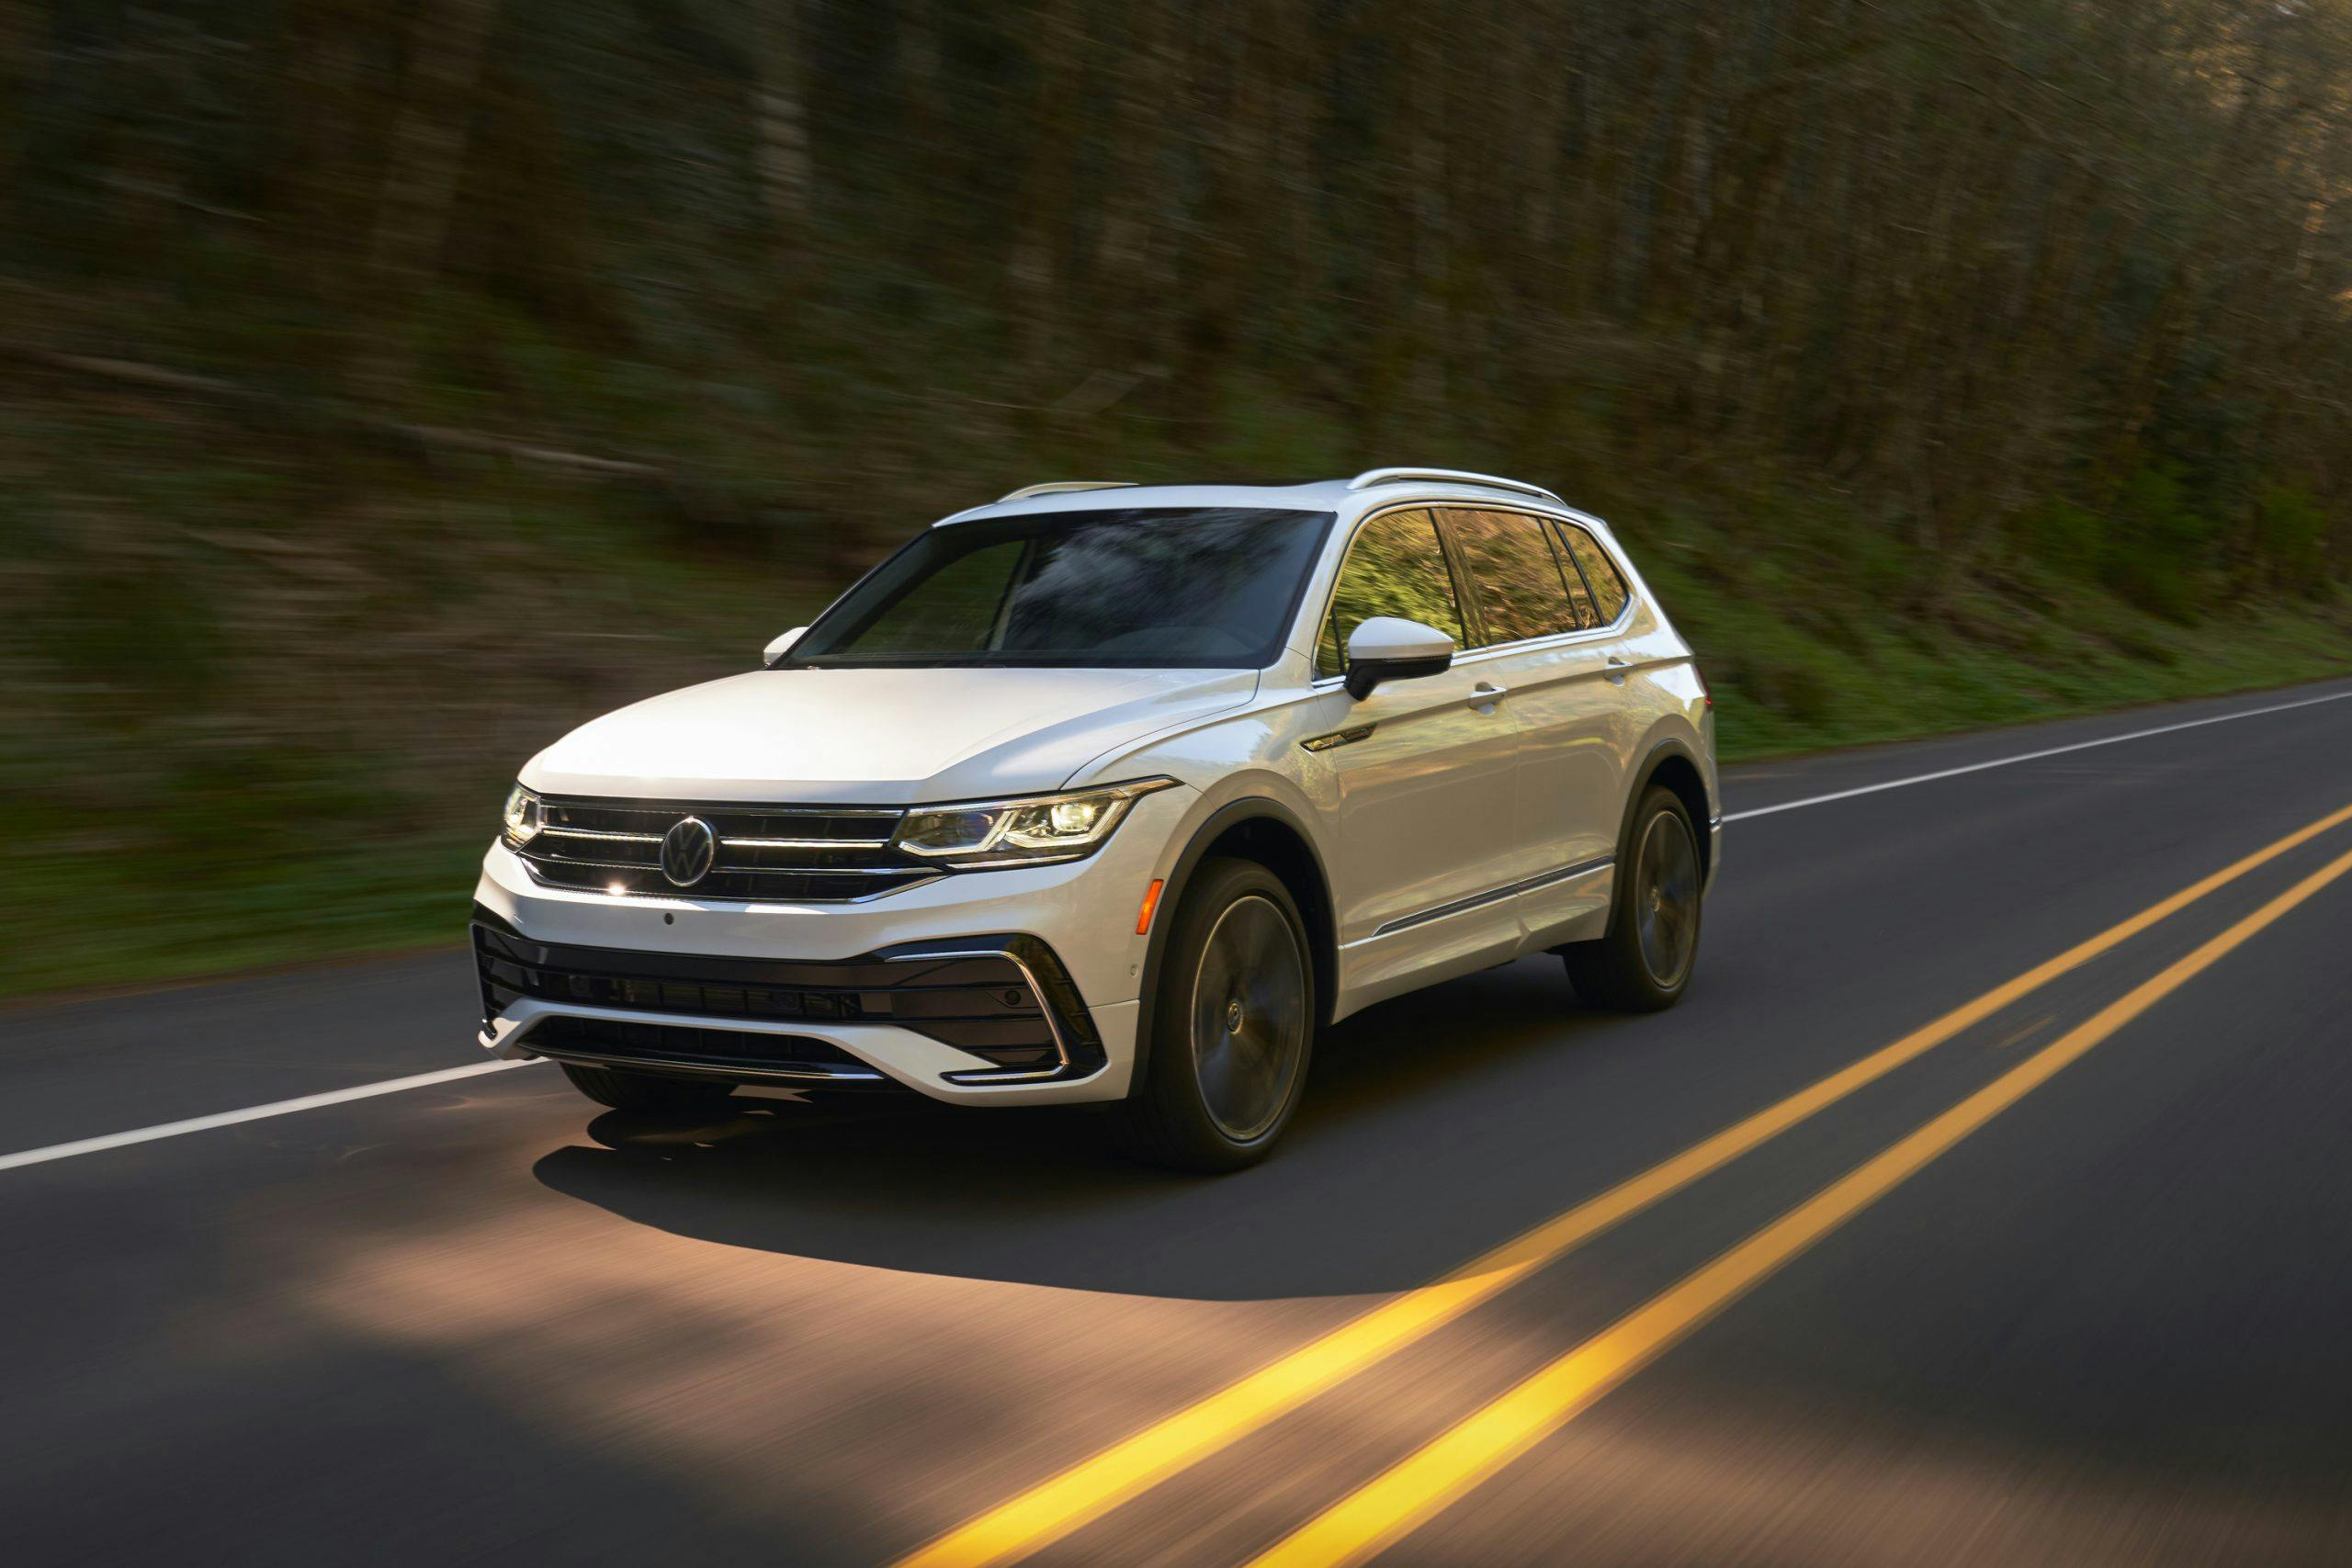 This is the new Volkswagen Tiguan, now the most popular VW in the